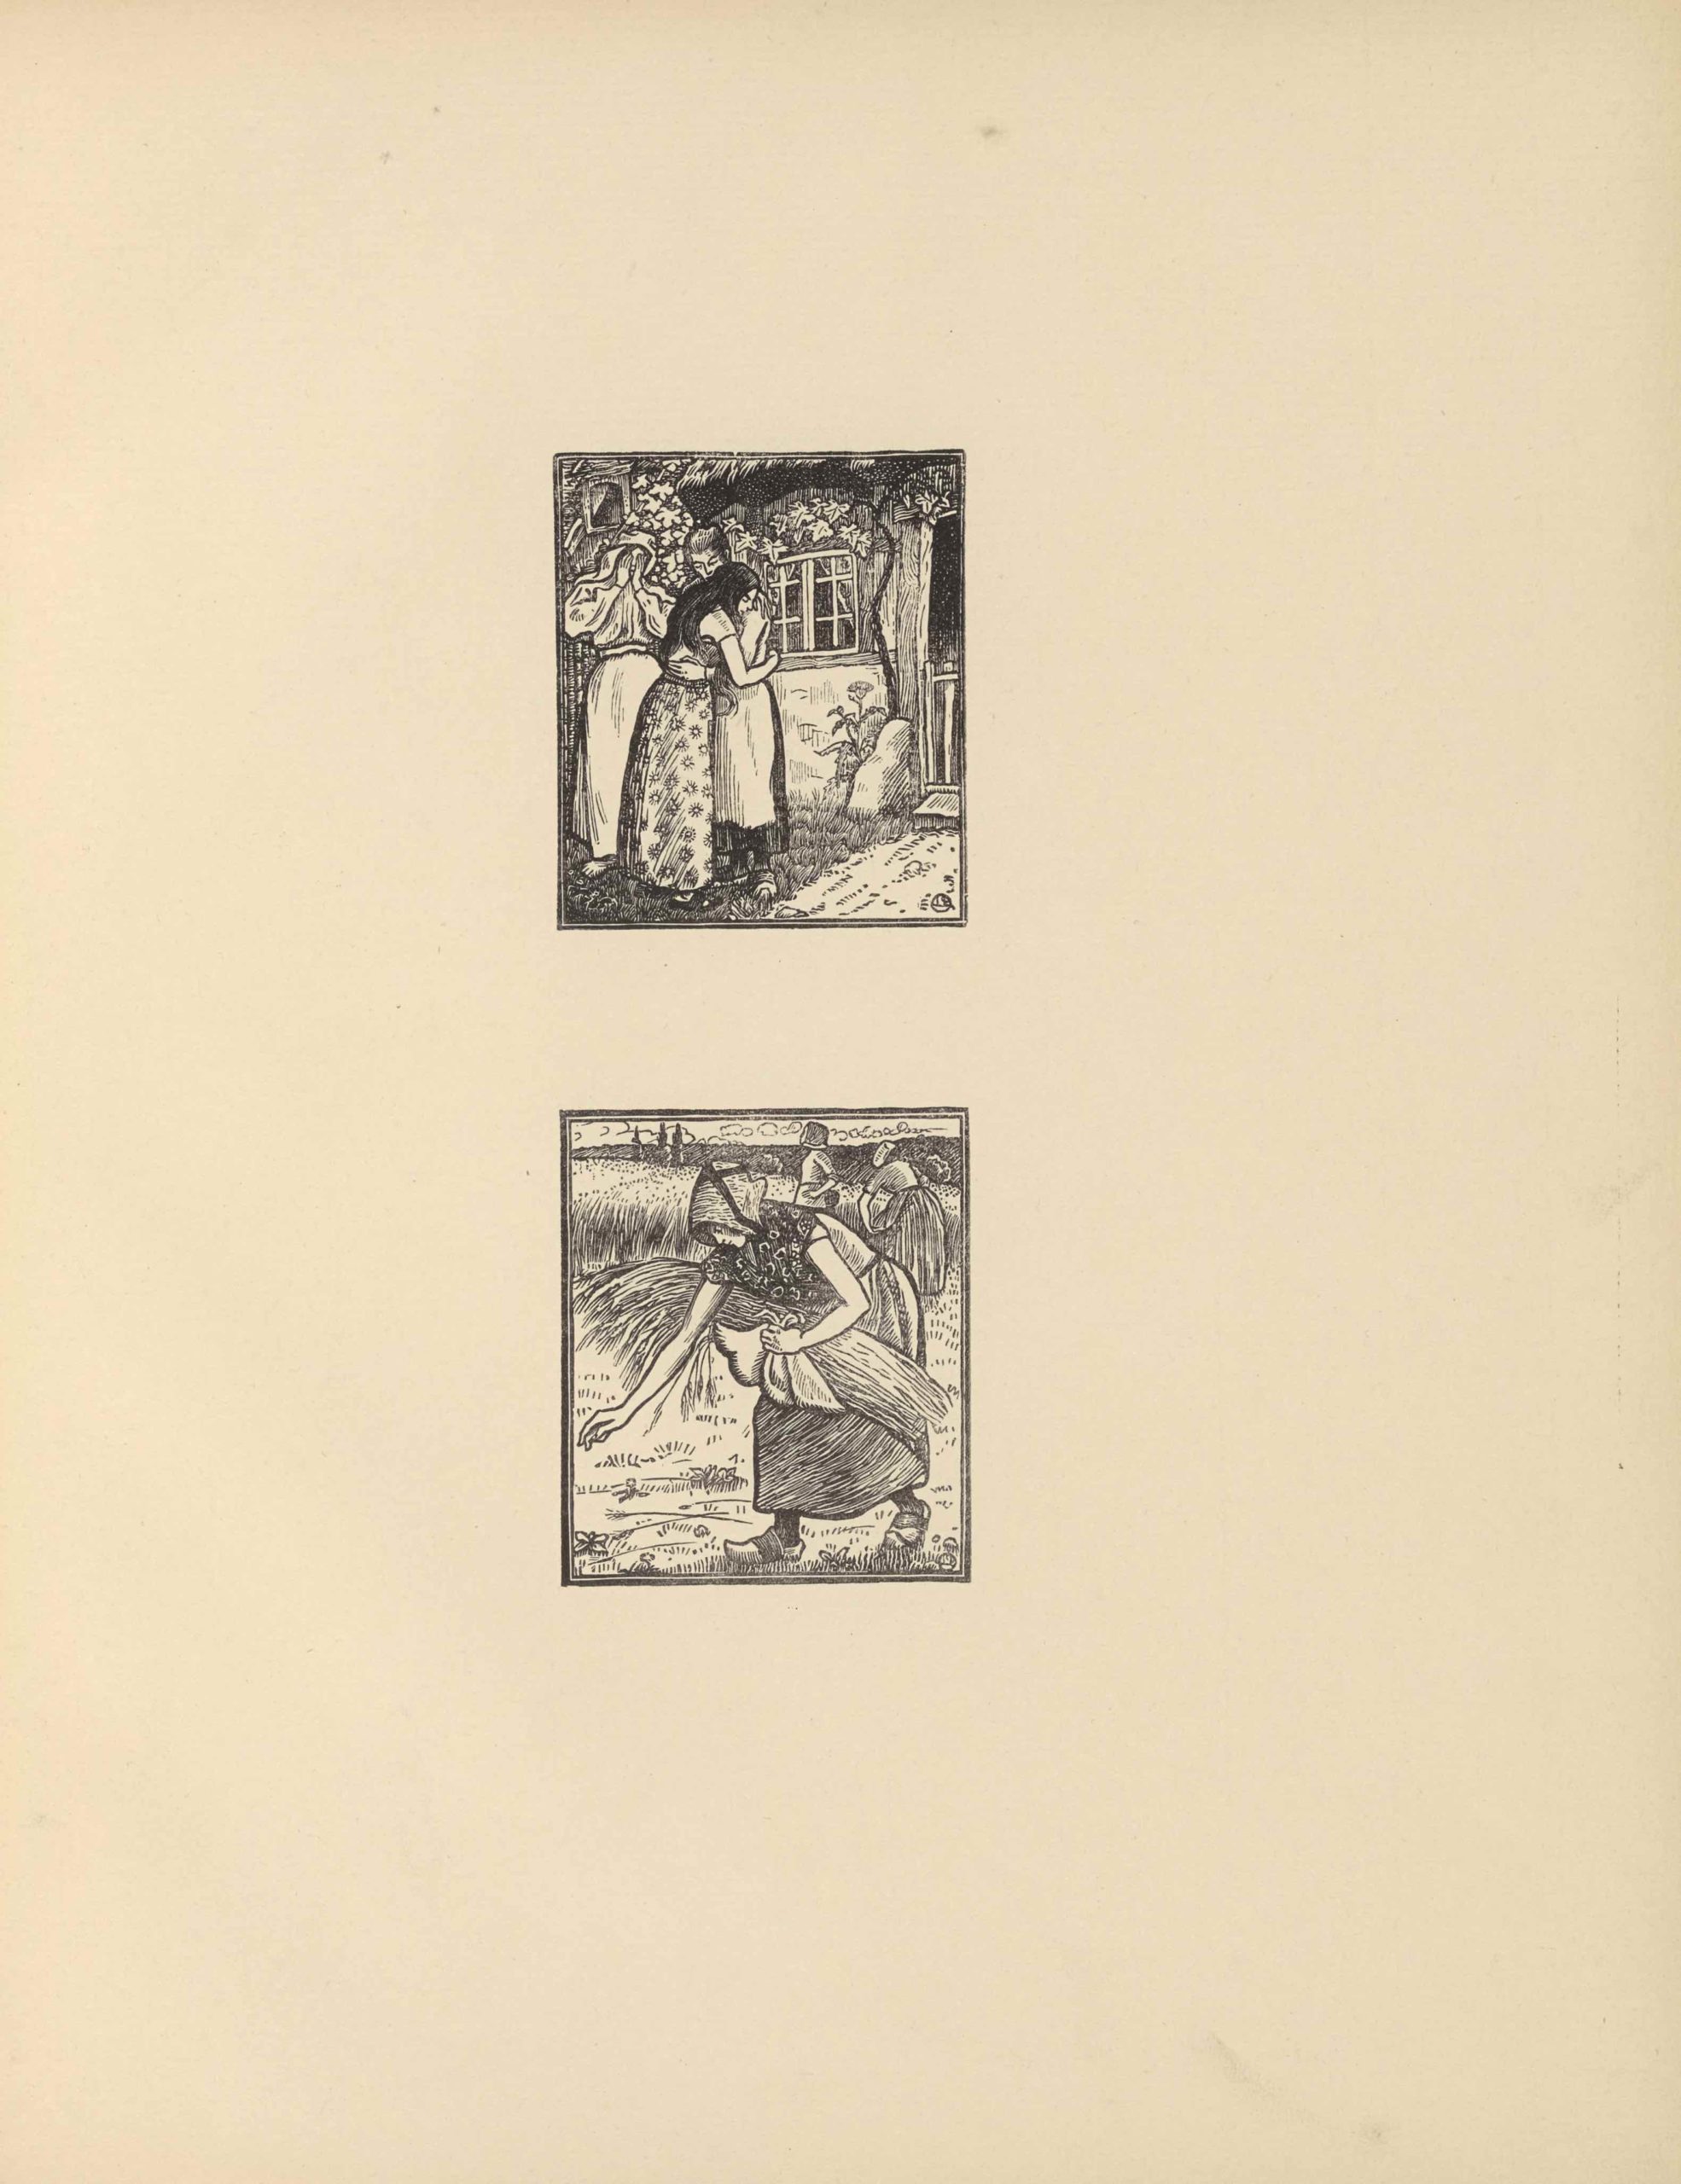 The two small woodcuts appear in portrait orientation, centered vertically on the page, each within a double-lined border. The rectangular images, printed in black ink, depict scenes from the Biblical story of Ruth and Naomi. The top image shows three female figures, in Breton dress, standing in front of a building. In the centre foreground, dark-haired Ruth, wearing a floral dress, embraces the older-looking Naomi, who wears an apron and clogs. Just behind them, to their left, Orpah holds her hands to her face, appearing to weep. She too, wears clogs, as well as a scarf over her hair and shoulders. The house behind them has casement windows and a thatched roof. On the right, ivy and a flowering plant emerge out of a crack in the wall to cover the house. On the extreme right, an open doorway reveals the house’s darkened interior. The second image is an extreme close-up of Ruth gleaning fallen wheat in a field. She bends forward, facing left, in the centre foreground. Her face, shadowed by a bonnet with dark ribbons crossed over the crown, is in profile. She wears clogs and a floral blouse as she bends, right arm outstretched, to pick up stray wheat strands. With her left hand, she holds a bundle of wheat in her apron. Behind her, in the middleground, two women in similar dress stand in the field. More fields stretch into the distance, punctuated by three trees on the left. In the distance, clouds roll in from the left. Both images have a stylized monogram of the artist’s initials in the bottom right corner; a capital “L” and capital “P,” rotated 90 degrees to the left, are surrounded by a circle.